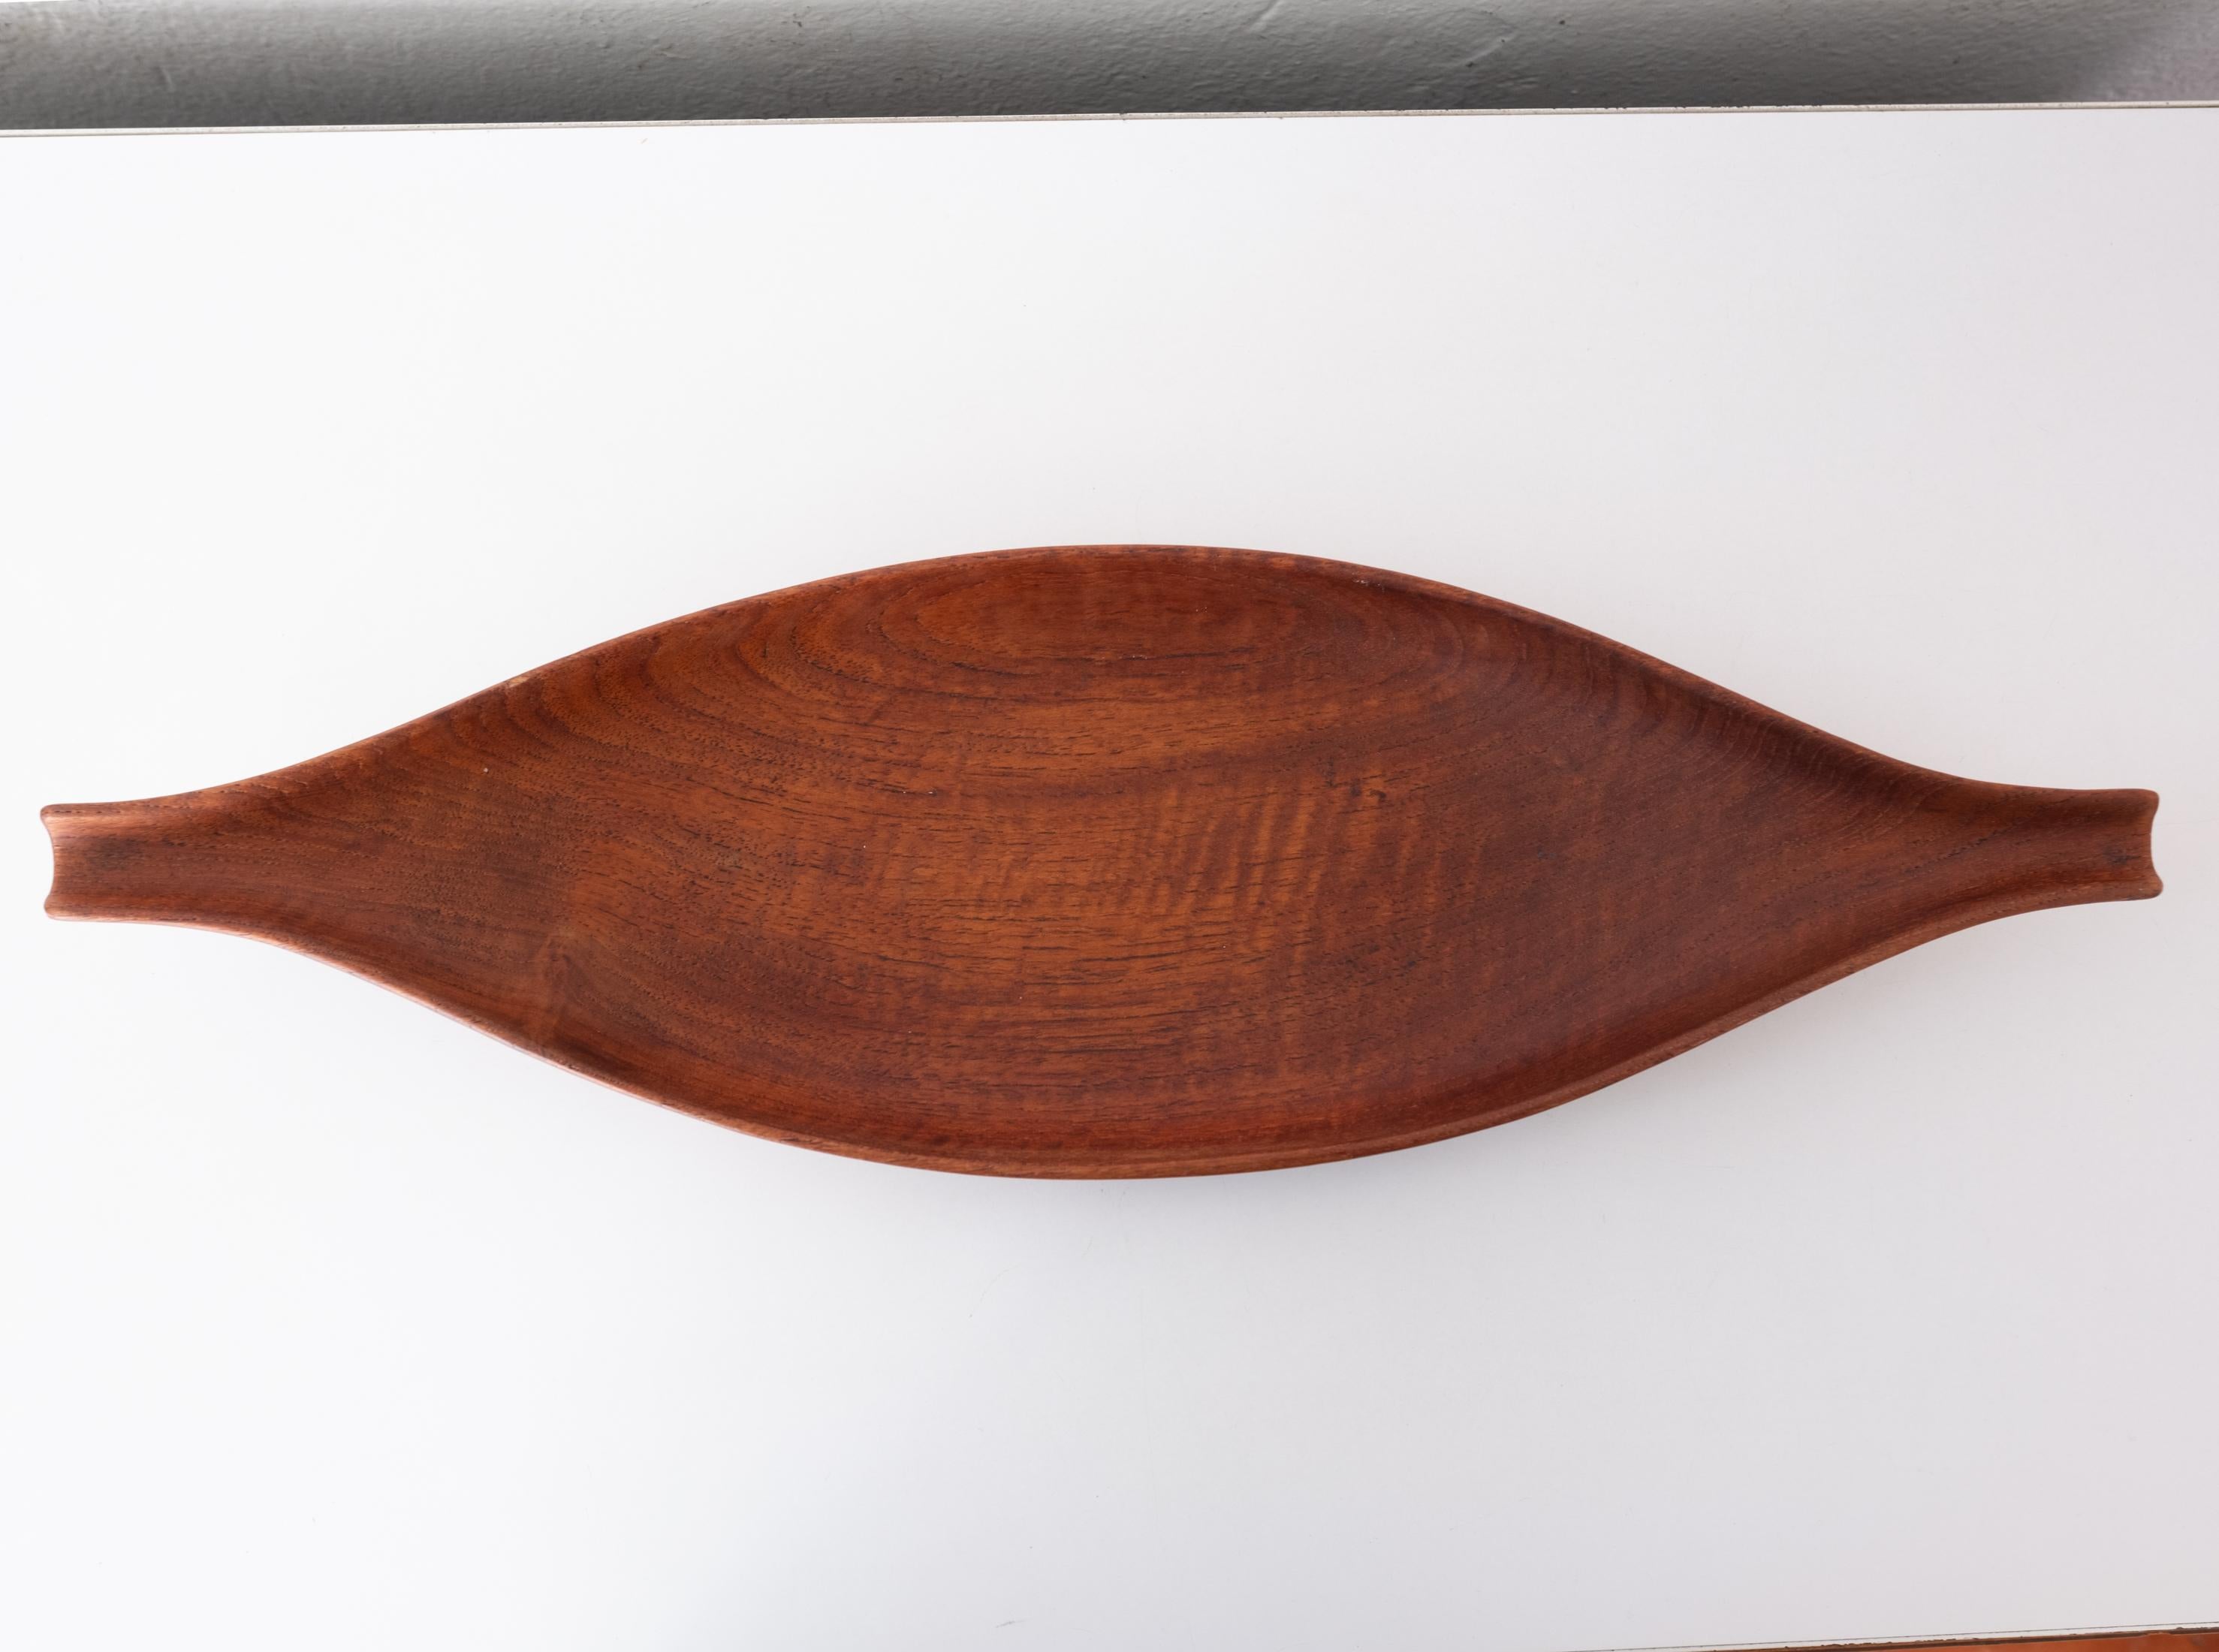 Sculptural Midcentury Italian Wood Fruit Bowl or Catch All by Anri, 1950s For Sale 3